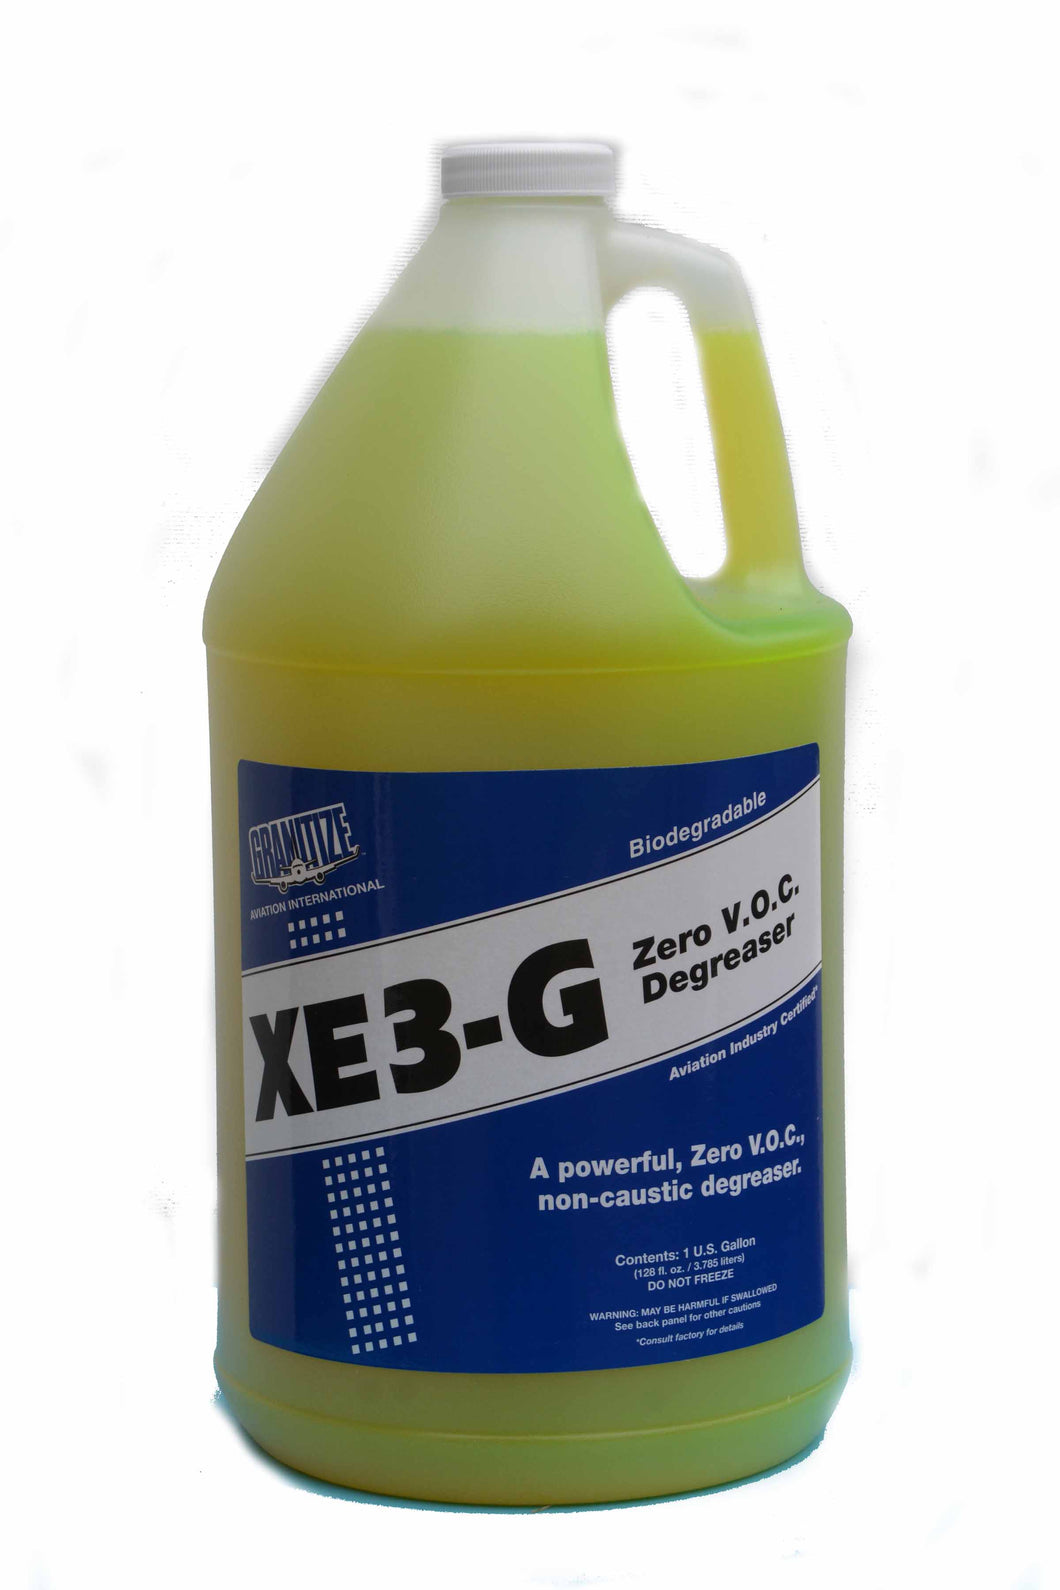 GRANITIZE XE3 Zero V.O.C. Cleaner & Degreaser Concentrate